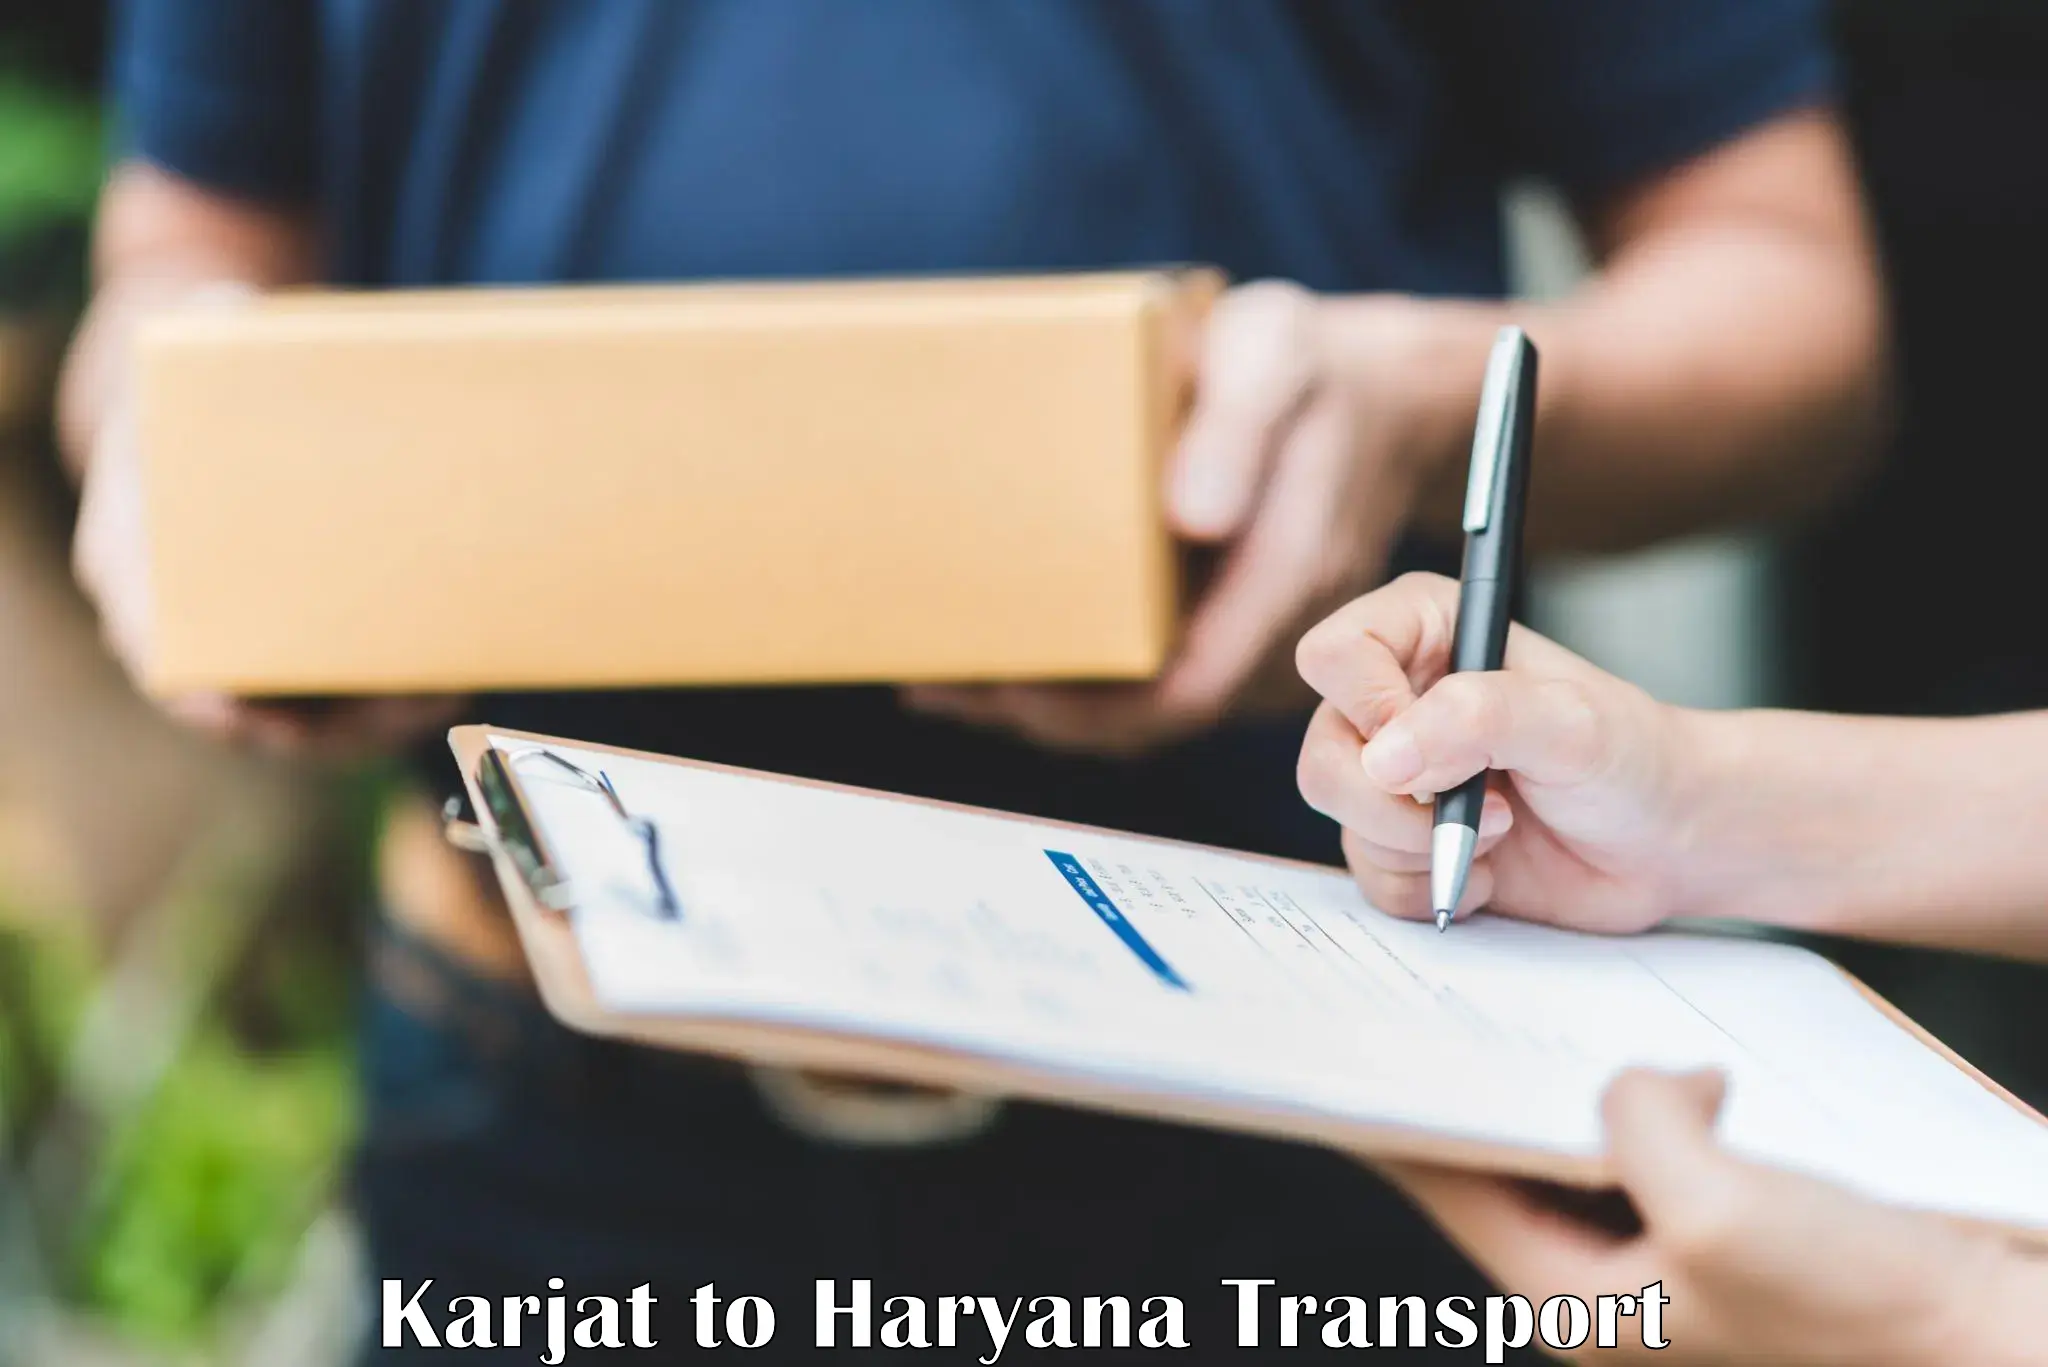 Container transport service Karjat to Panipat